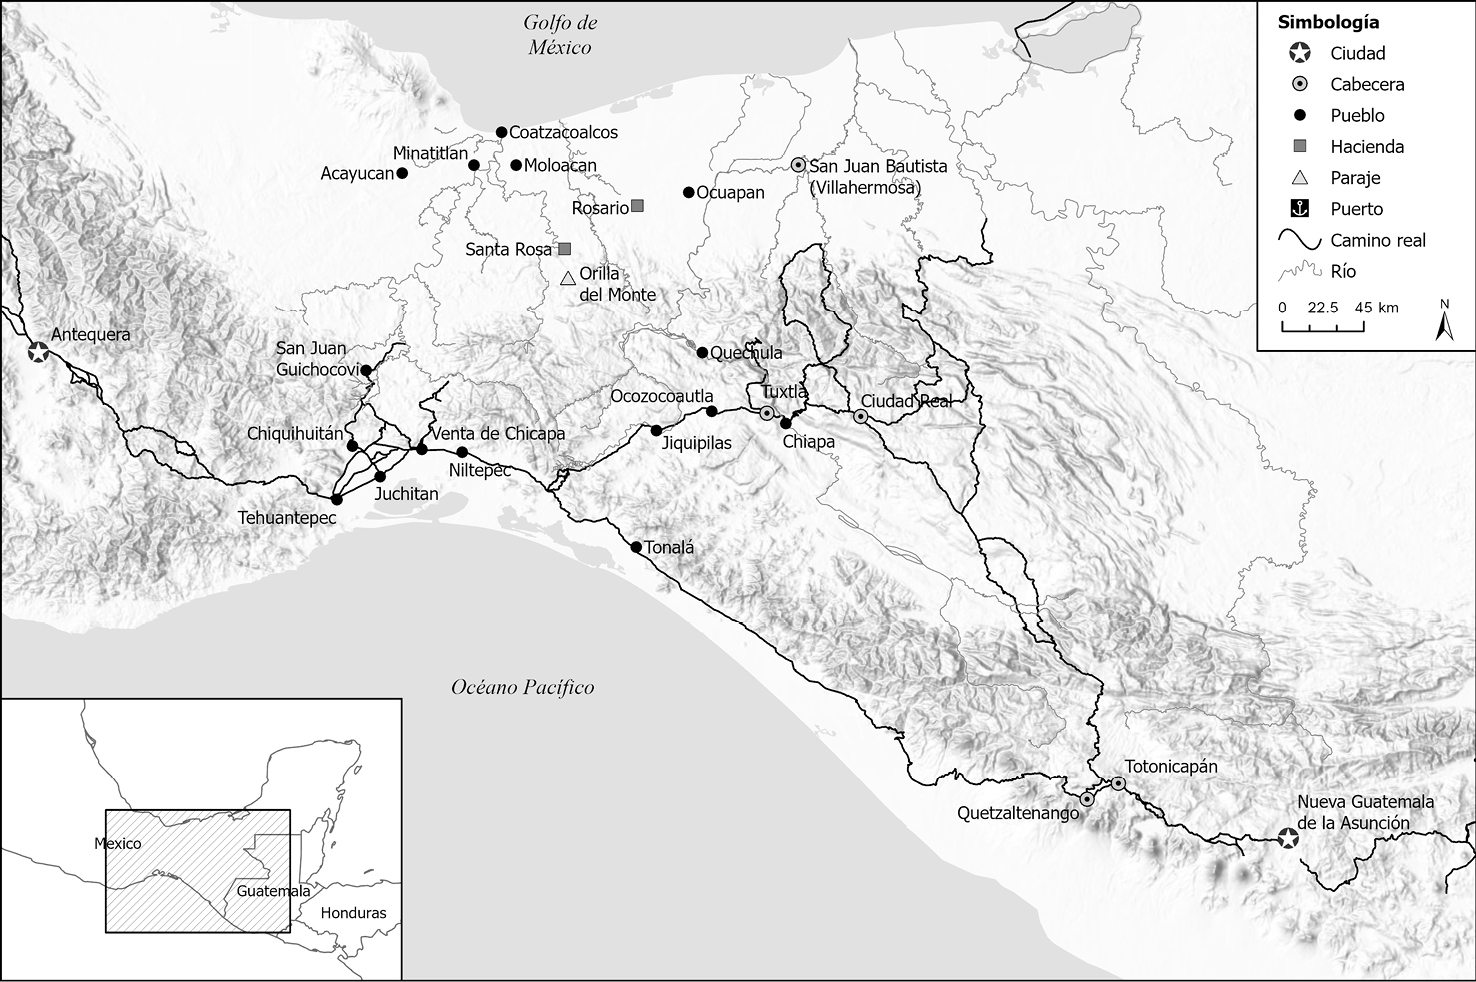 A map of the central coast of mexico

Description automatically generated